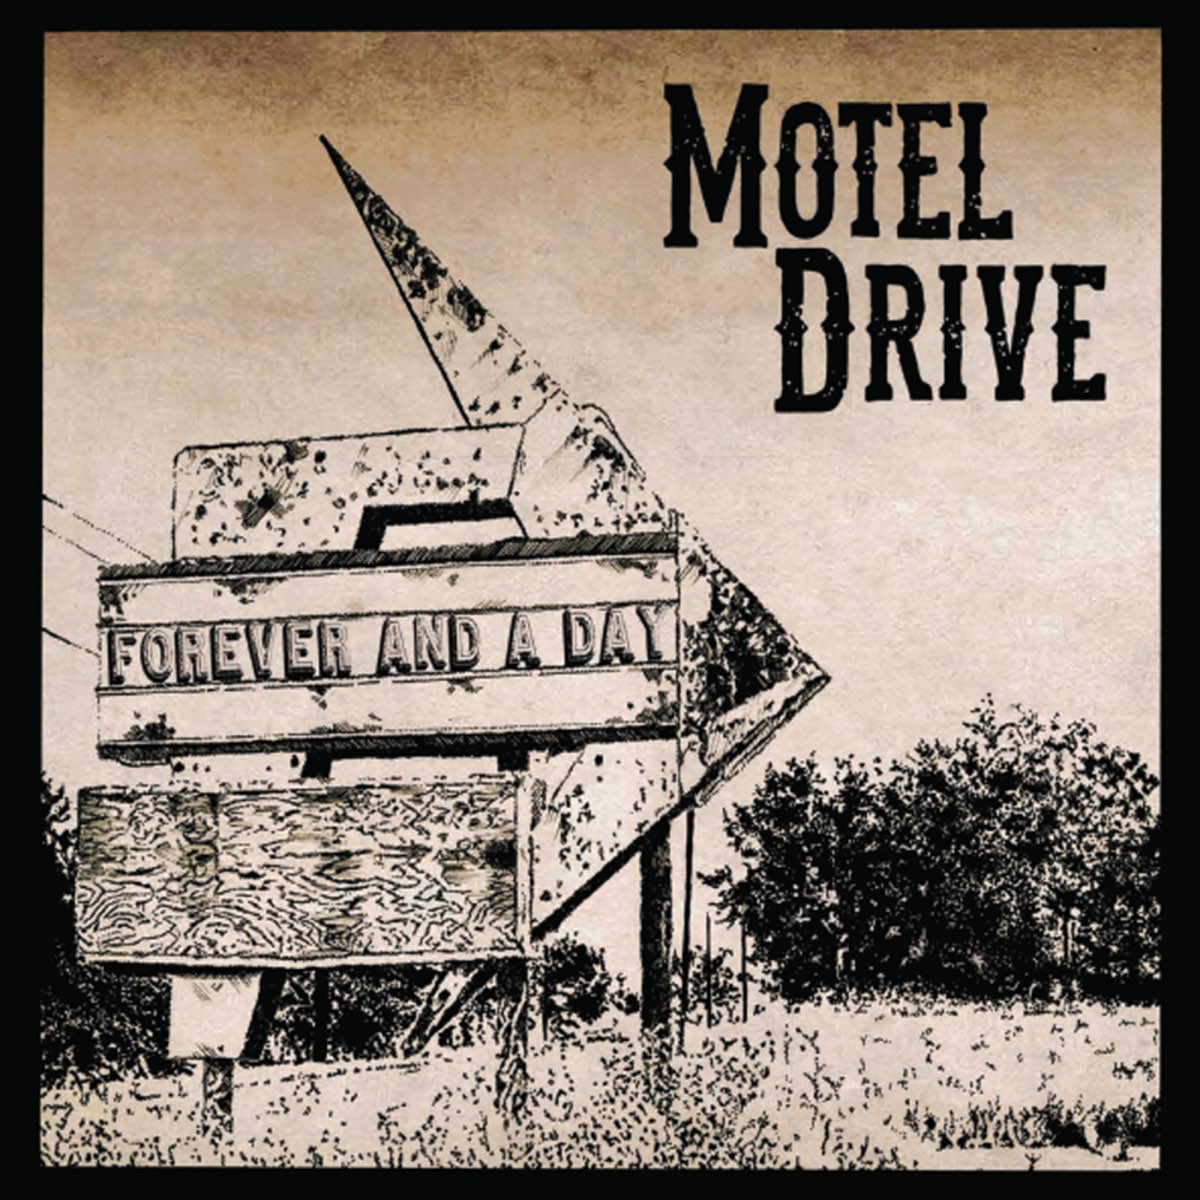 Motel Drive. Saint Motel обложки альбомов. Forever and a Day. Something in the way. Drive forever babbeo